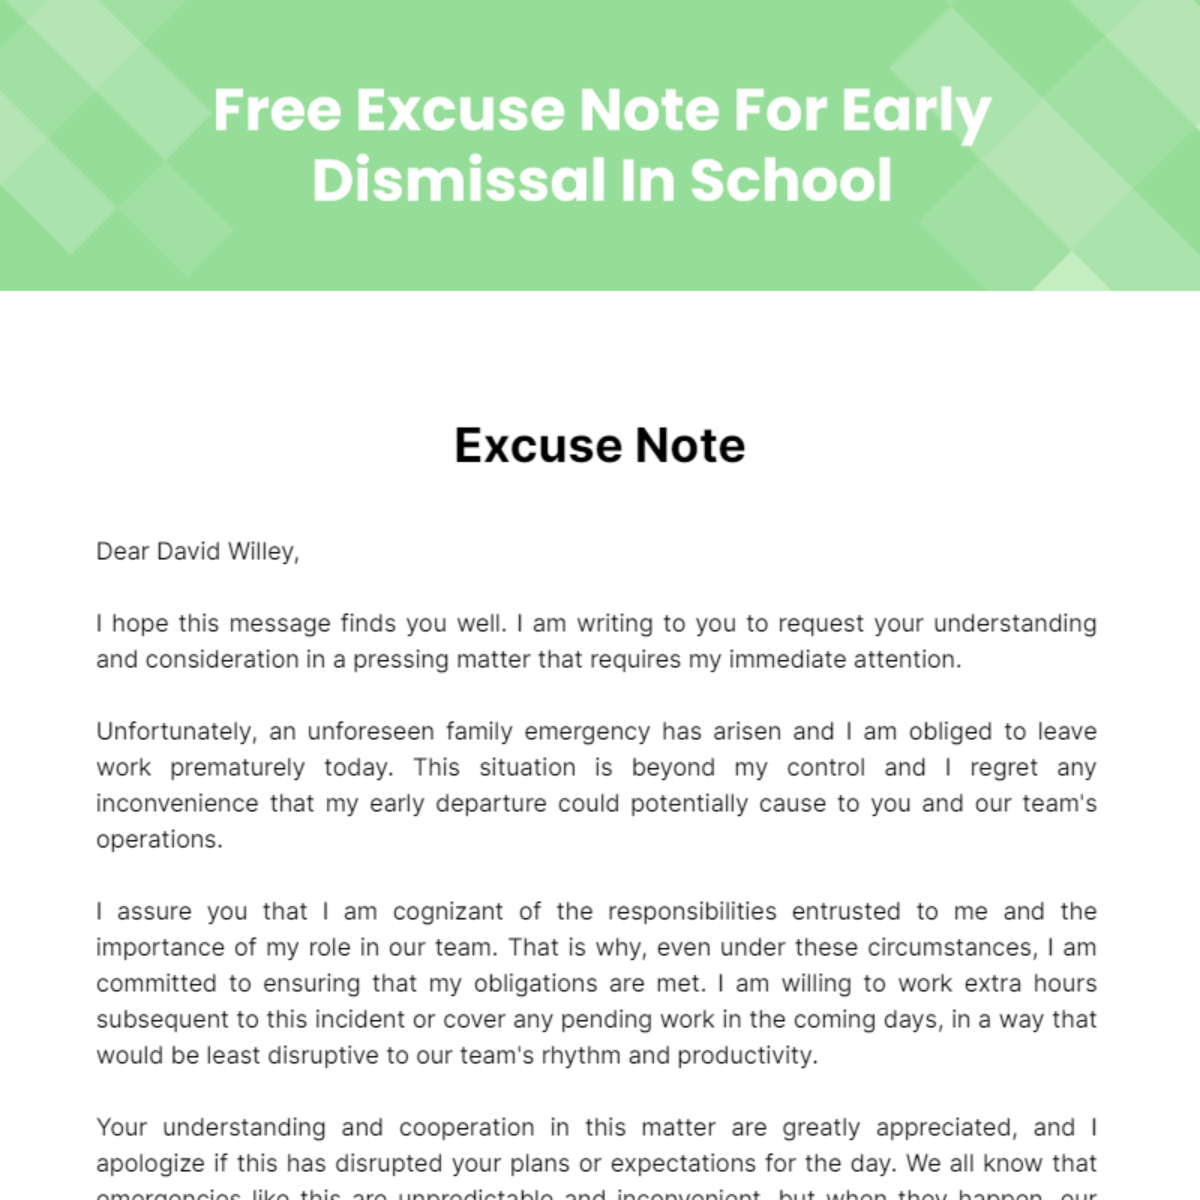 Excuse Note For Early Dismissal In School Template